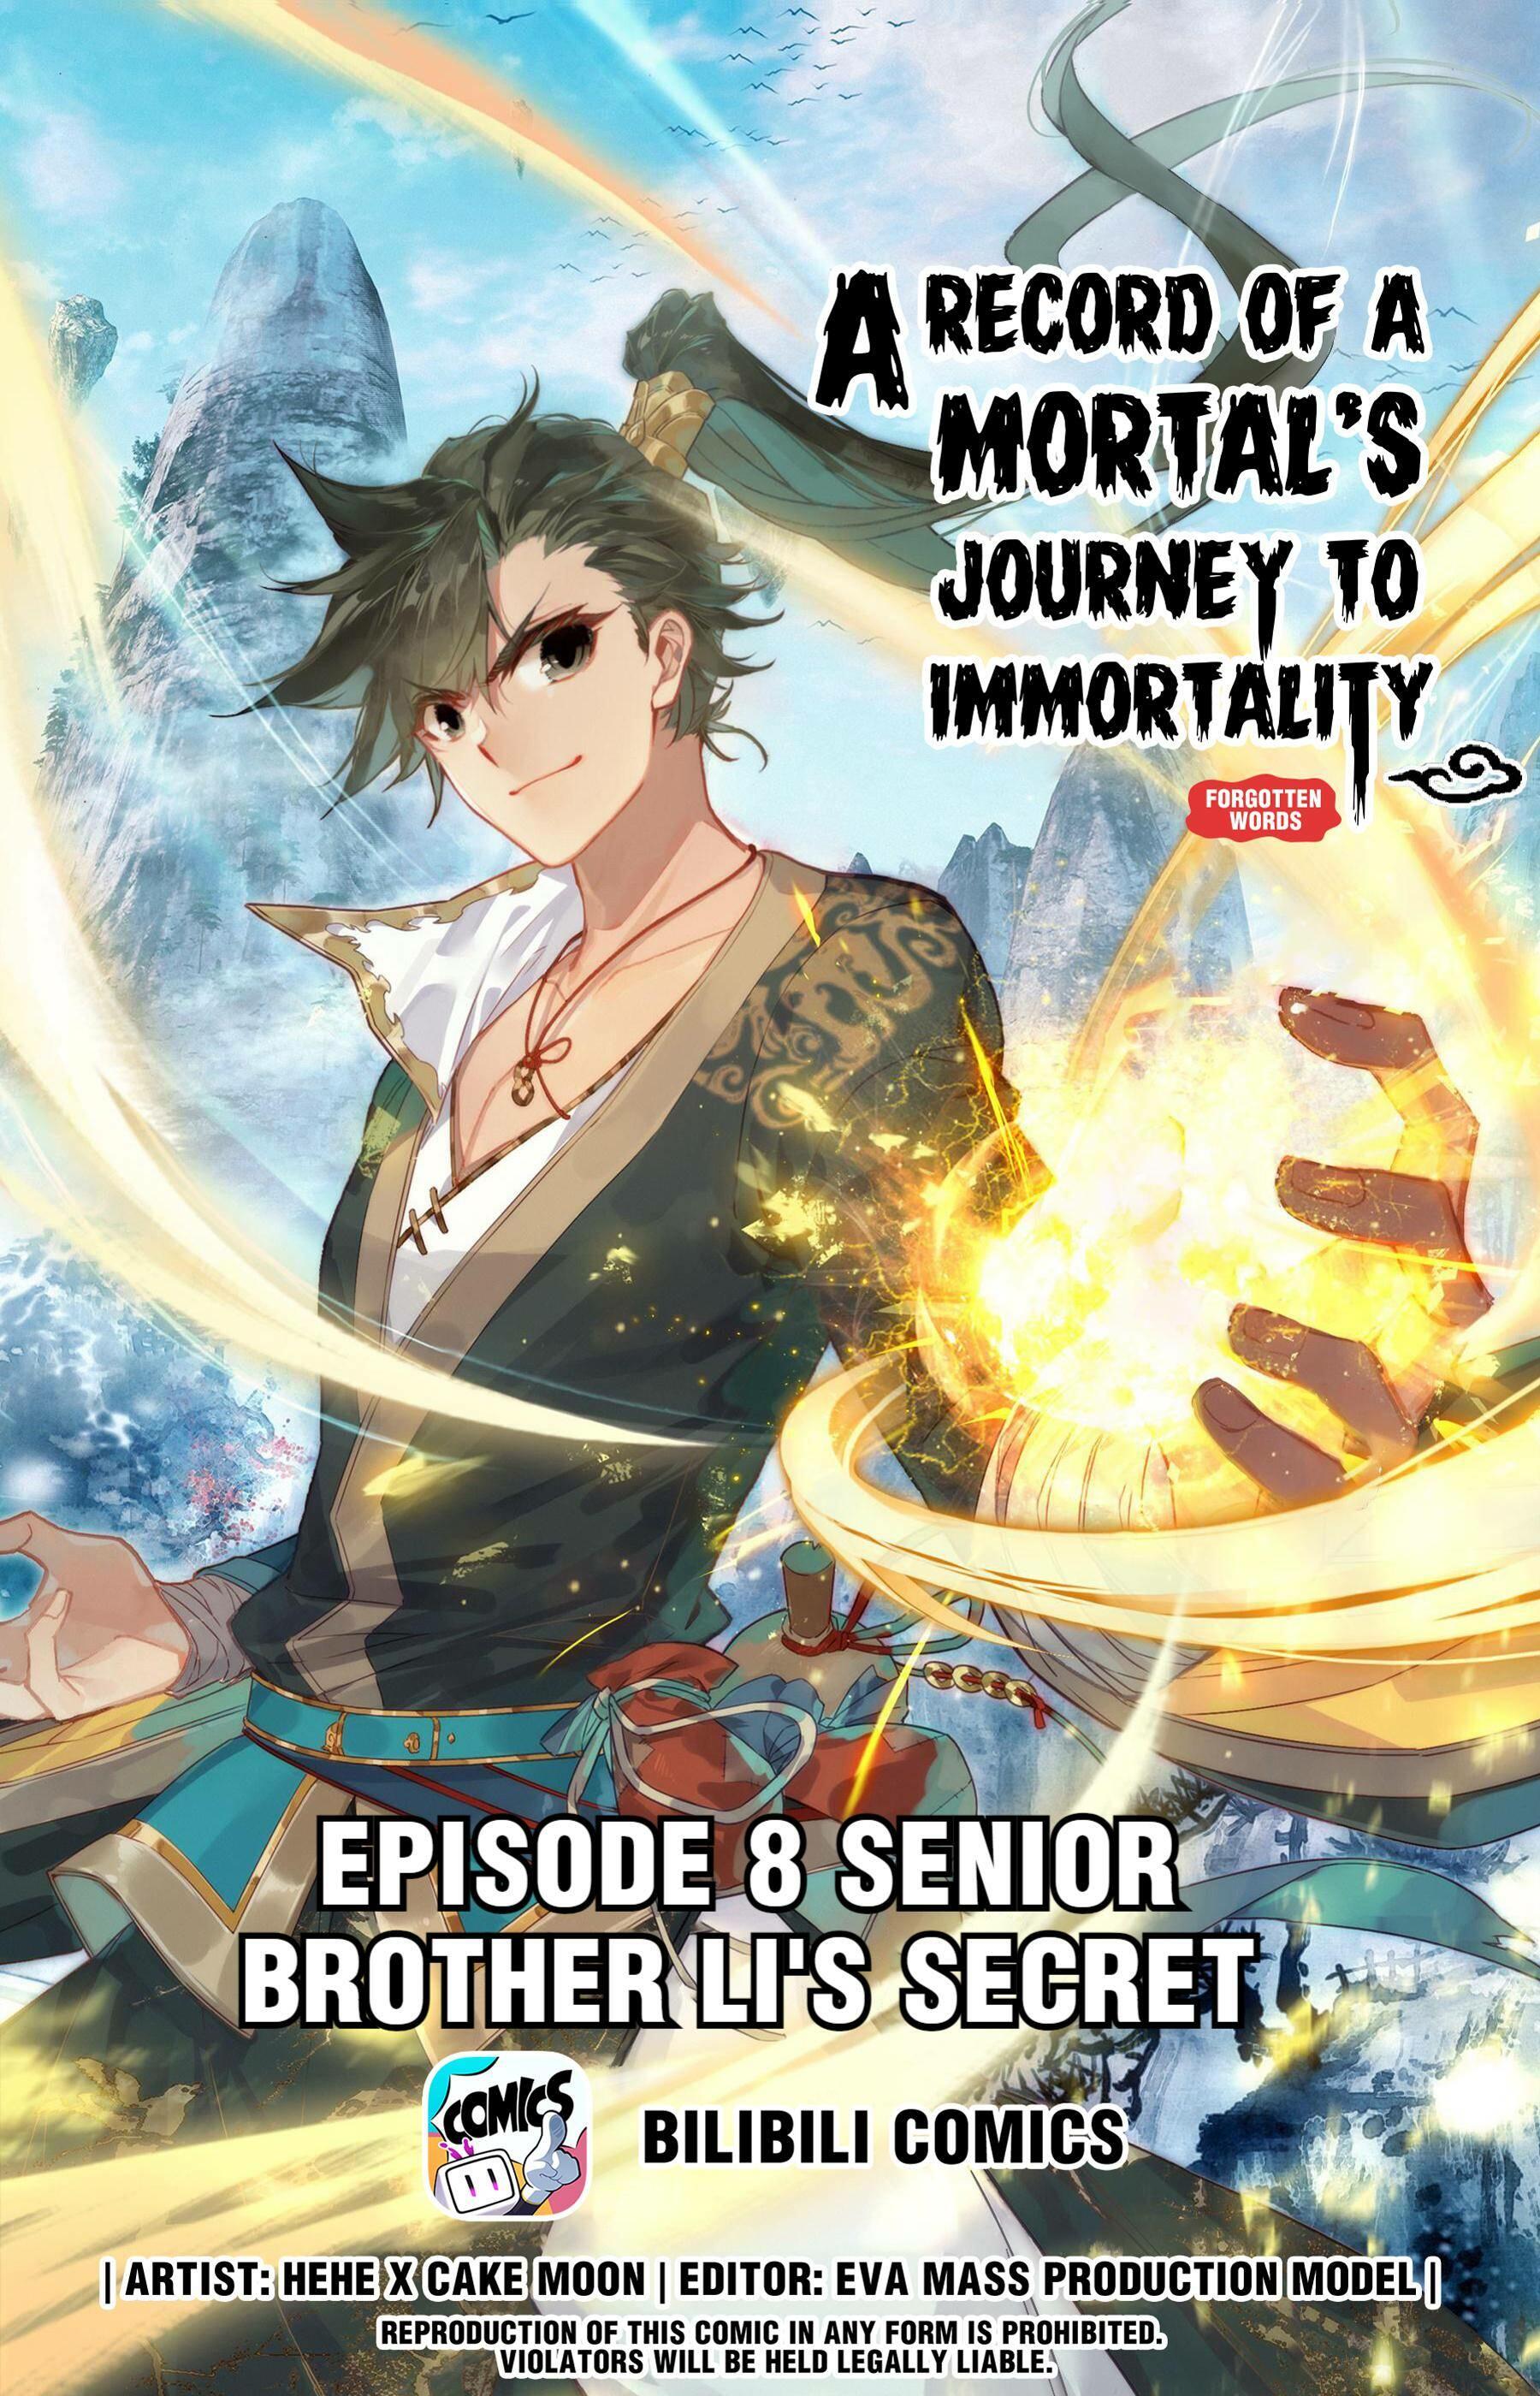 The Legend of the Legendary Heroes Episode 06 - BiliBili